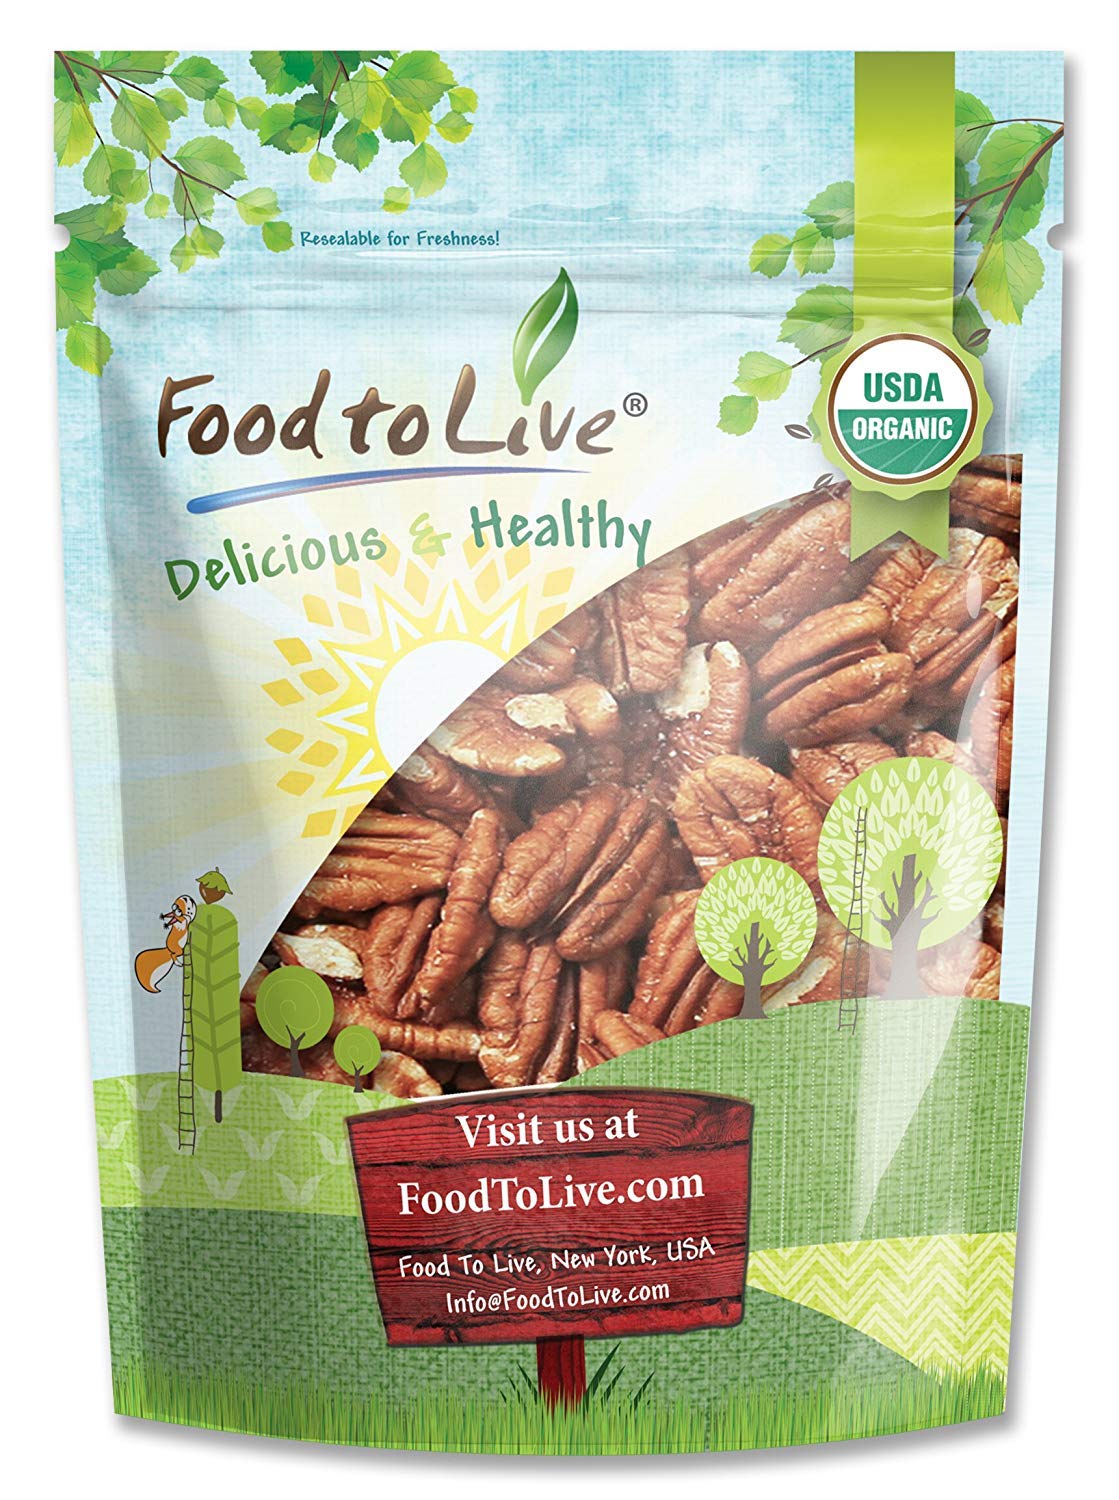 Food to Live Organic Raw Unsalted Pecan Halves, 1.5 Pounds